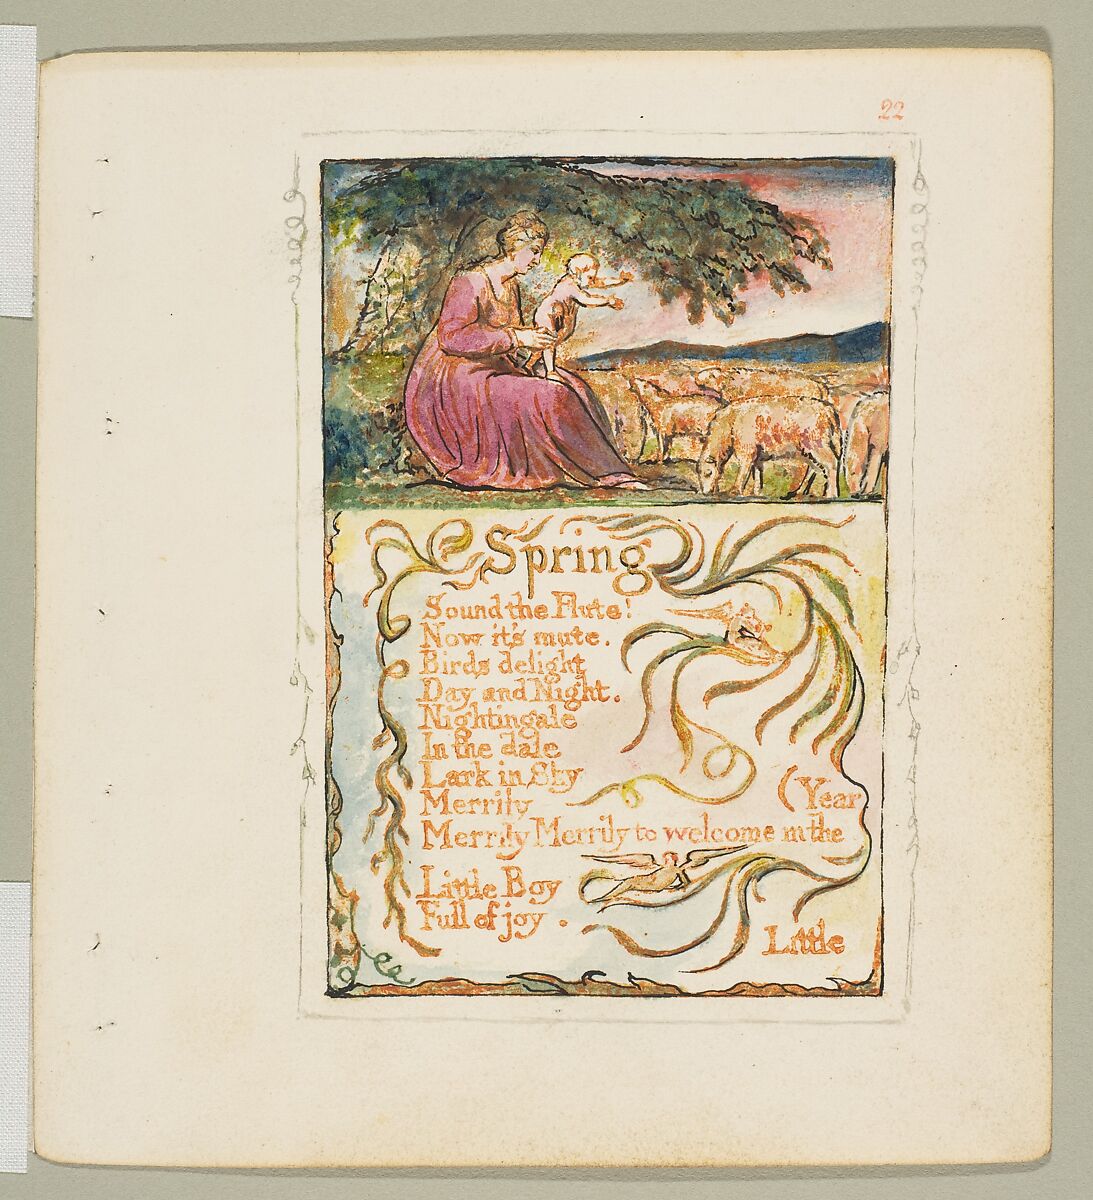 Songs of Innocence: Spring, William Blake, Relief etching printed in orange-brown ink and hand-colored with watercolor and shell gold